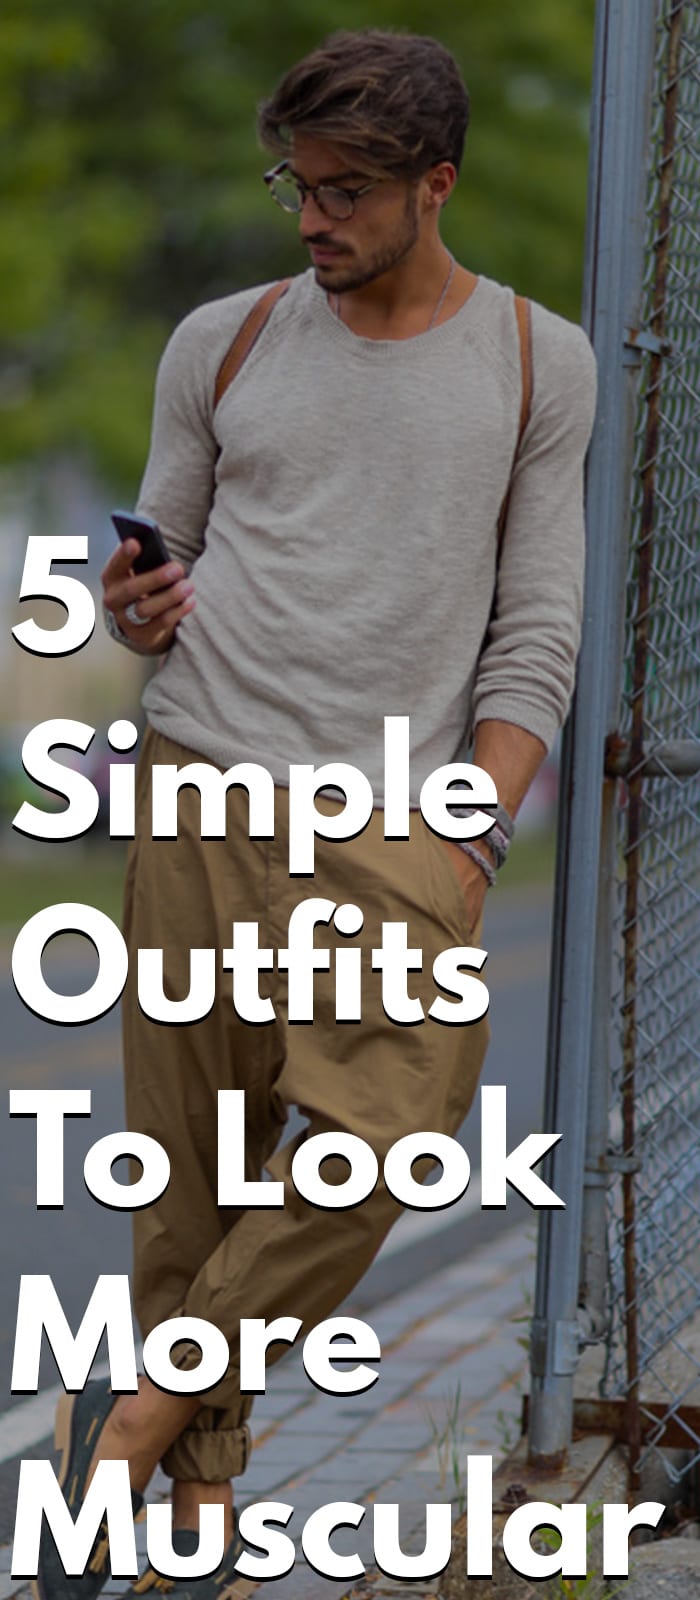 5 Simple Outfits To Look More Muscular